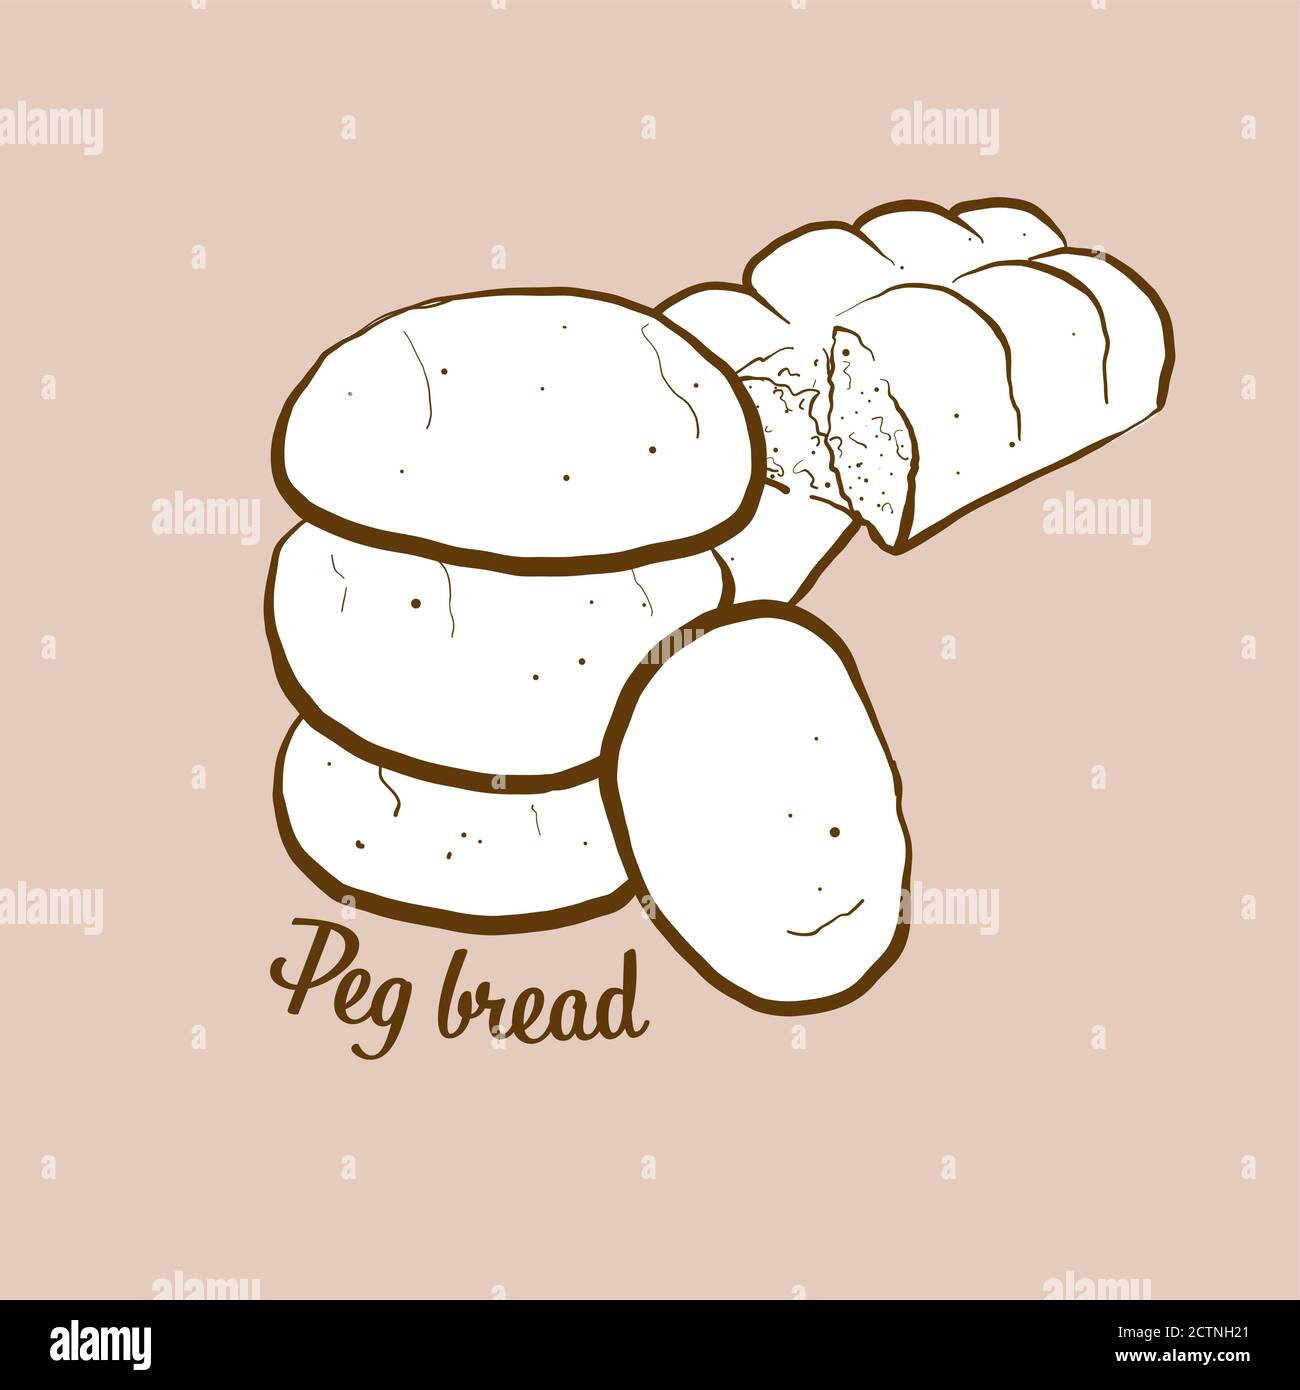 Hand-drawn Peg bread bread illustration. Leavened, lobed loaf, usually known in Jamaica. Vector drawing series. Stock Vector